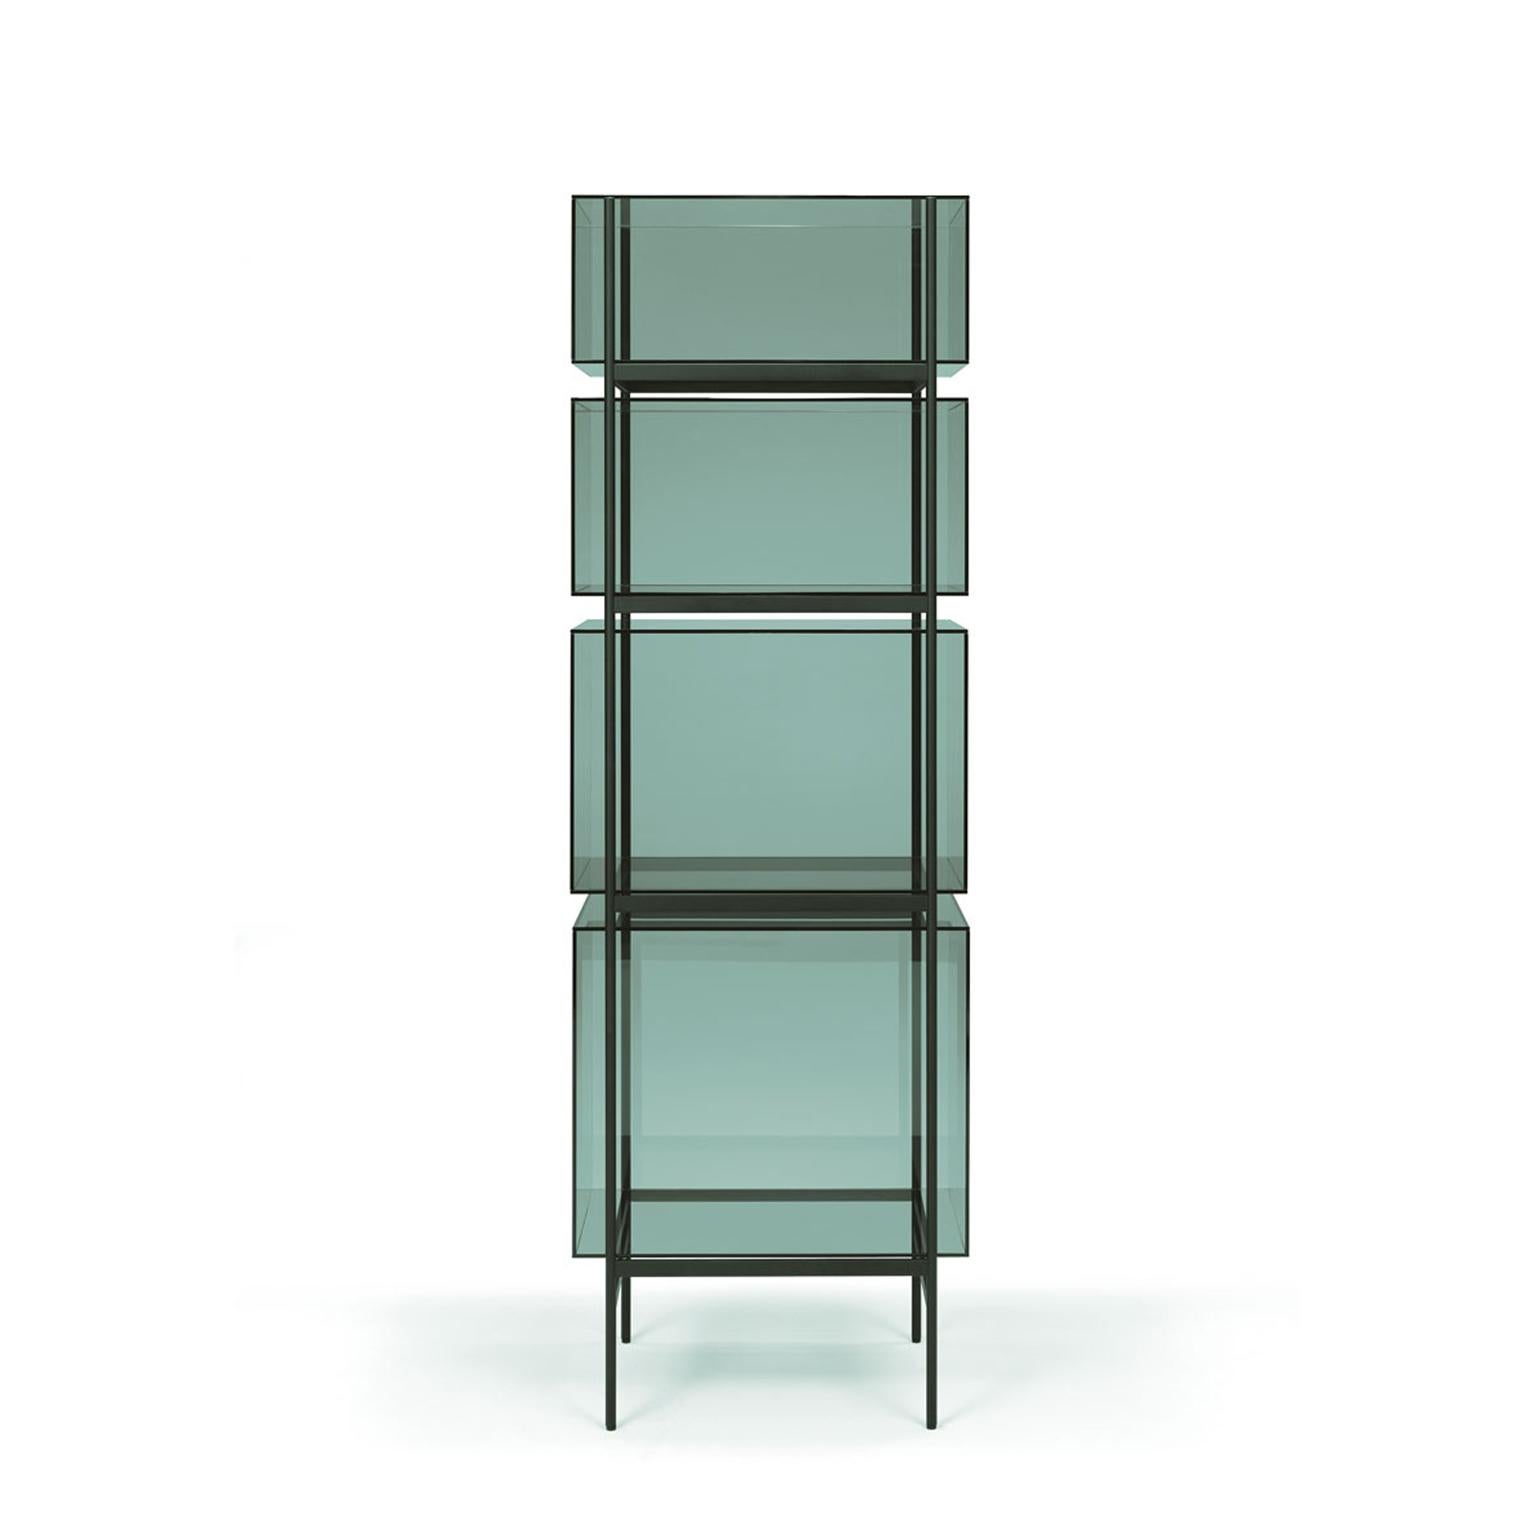 lyn cabinet - European, Minimalist, green, black base, German, cabinet, 21st century, high size

Studio Visser & Meijwaard describe their conception of lyn as a “graphic interplay between glass and the metal frameworks”. The doorless and diverse